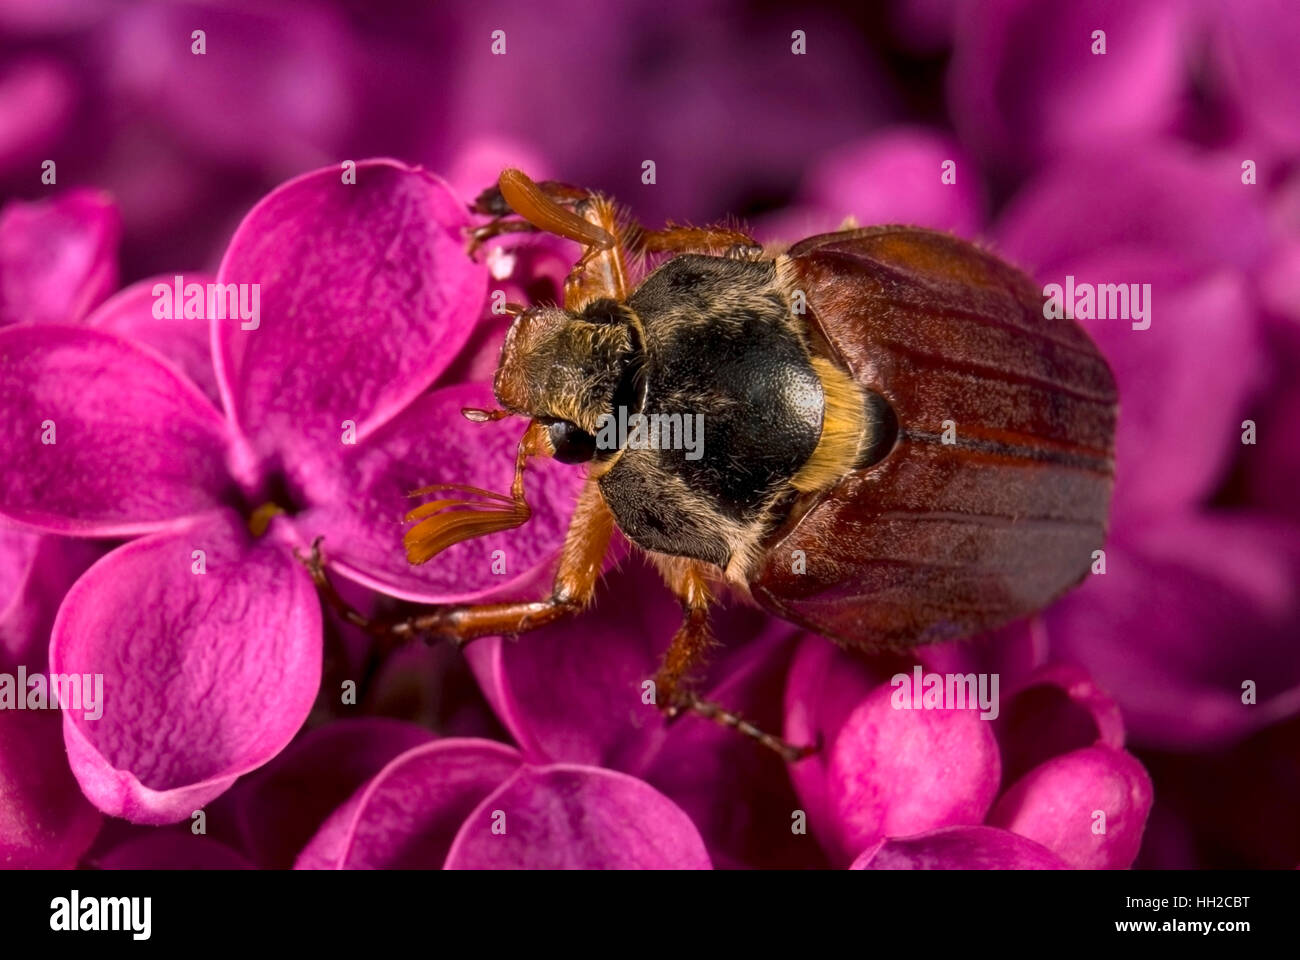 May-bug climbing on the violet lilac. Flowers background Stock Photo